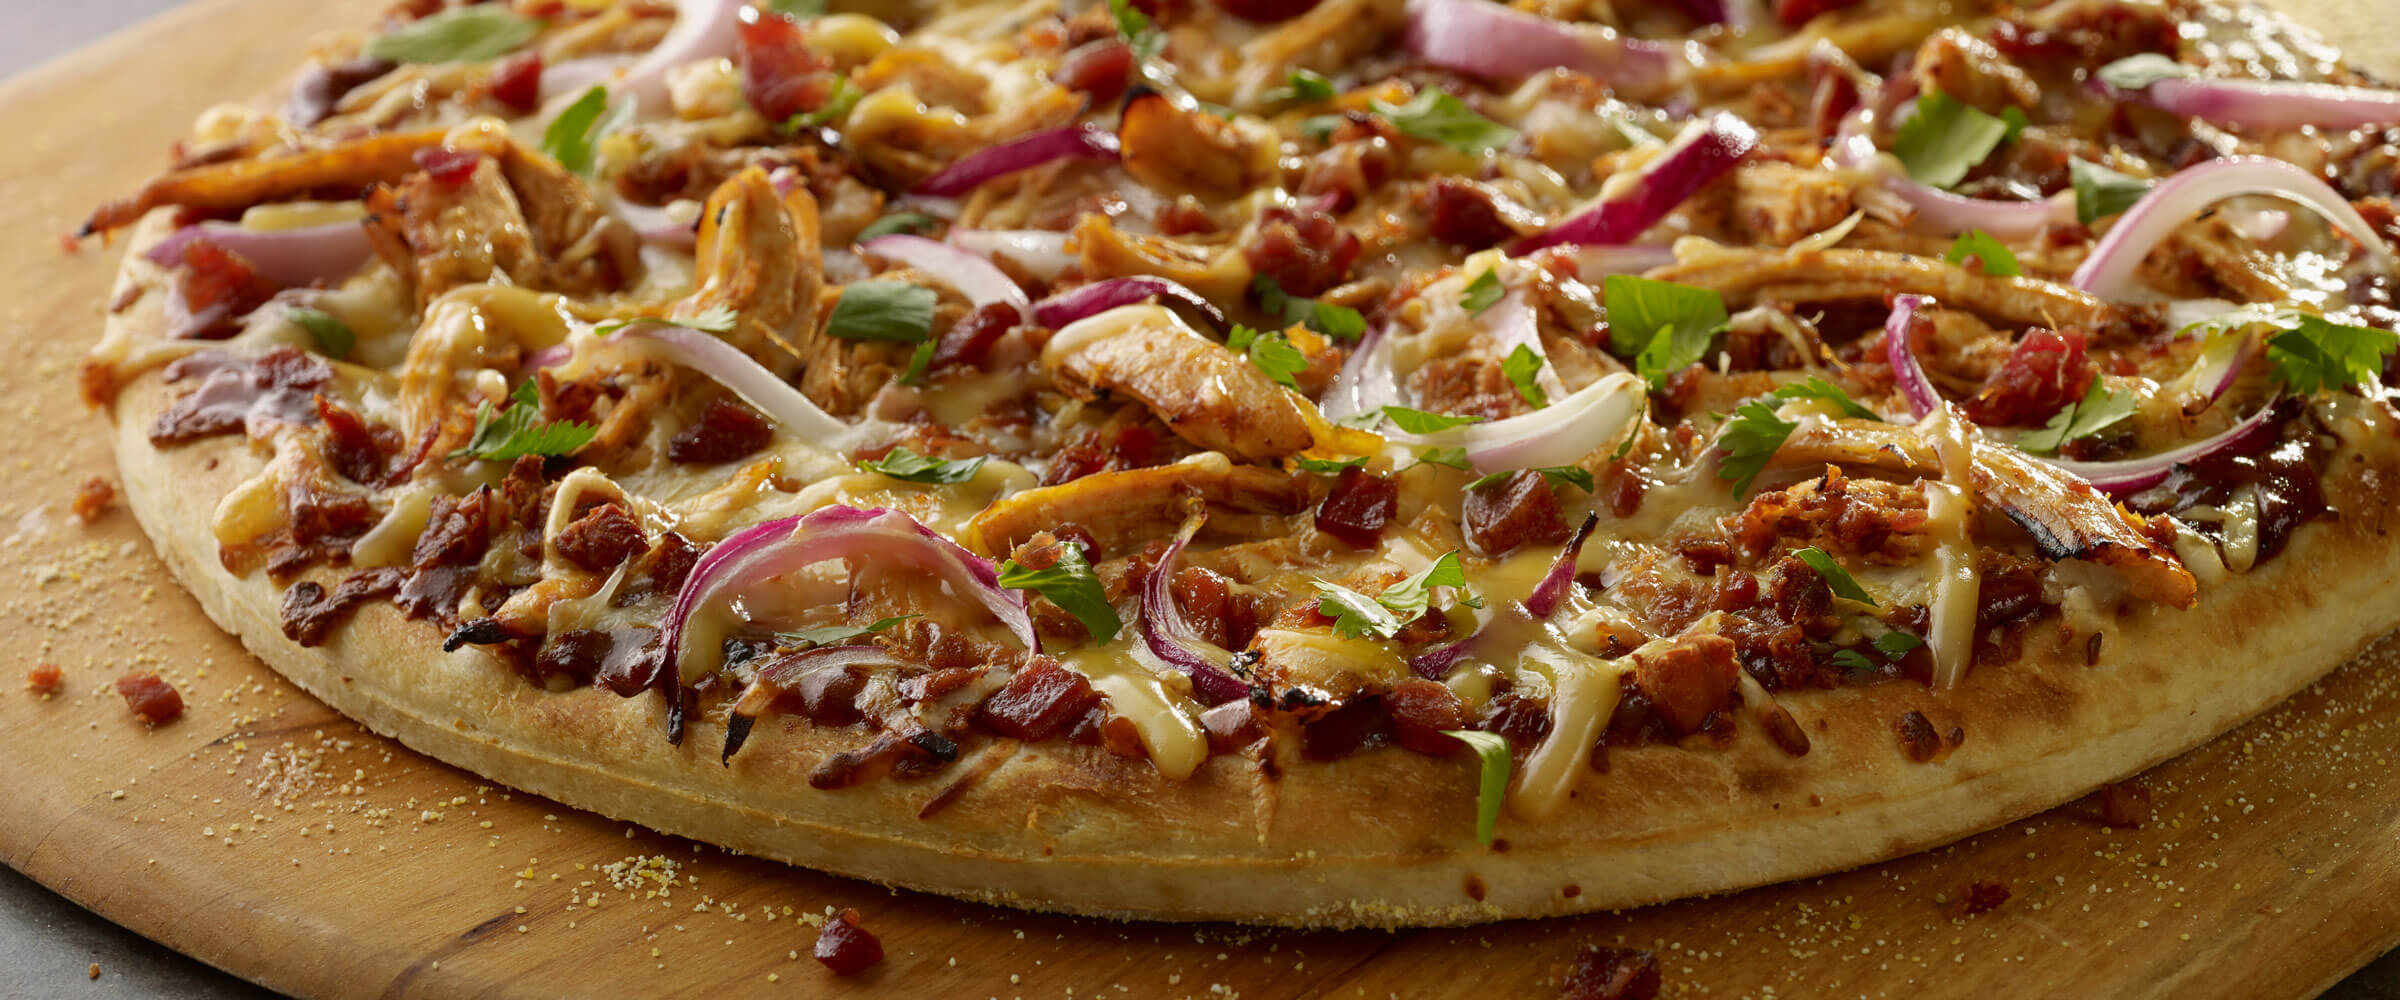 BBQ Chicken Bacon Pizza topped with red onions on pizza board